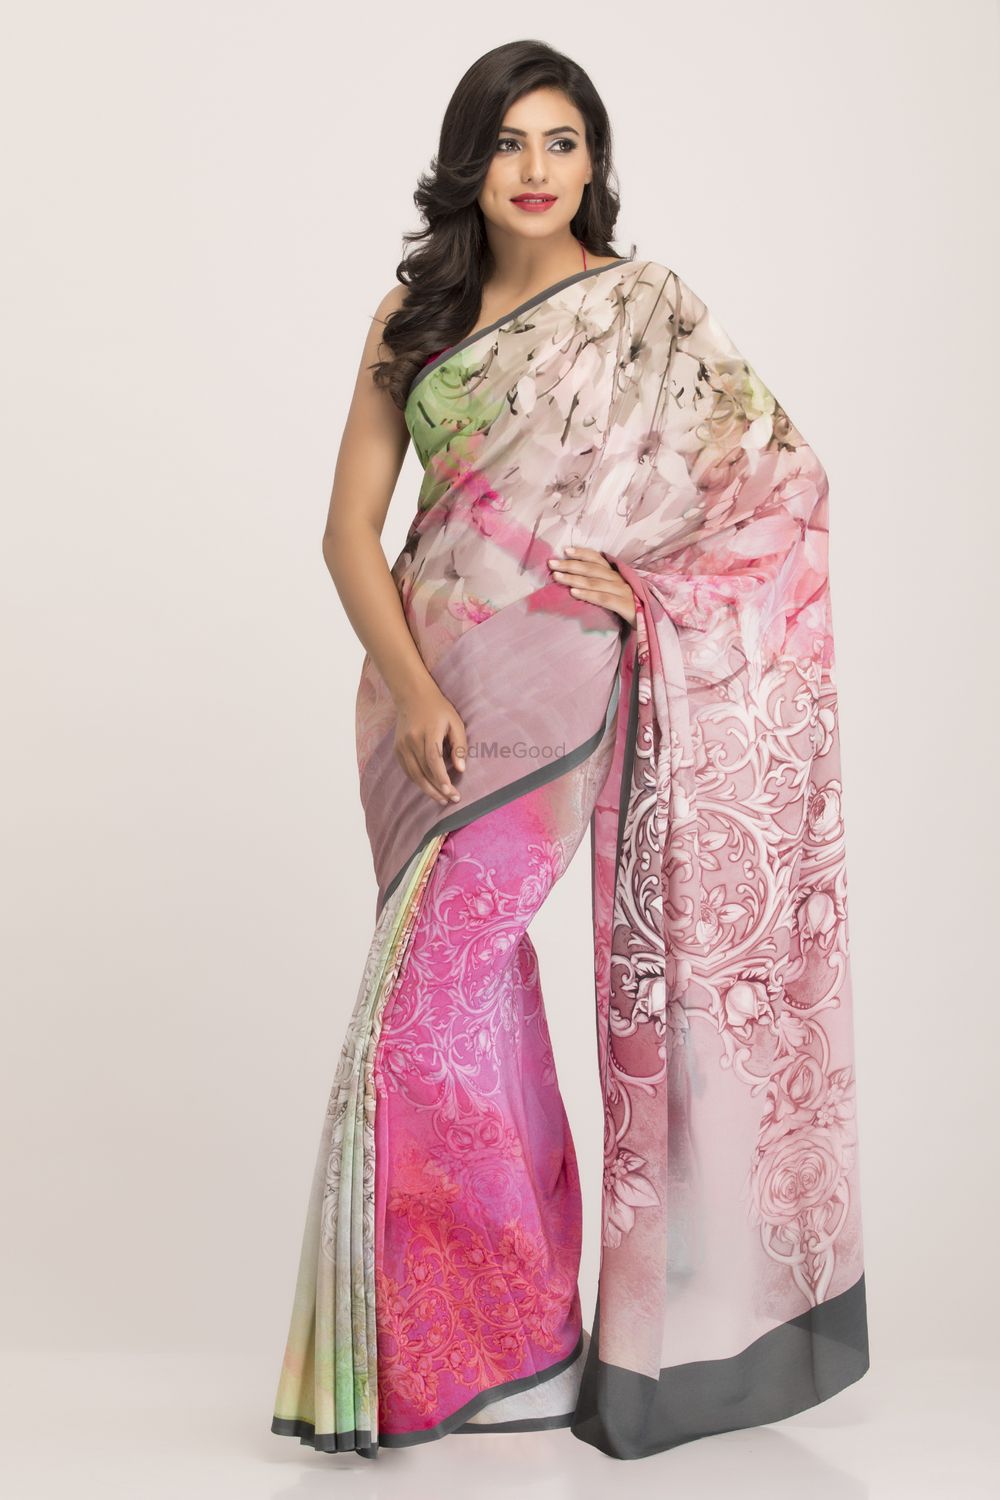 Photo From SAREE SAGA - By Sandook by Arushi